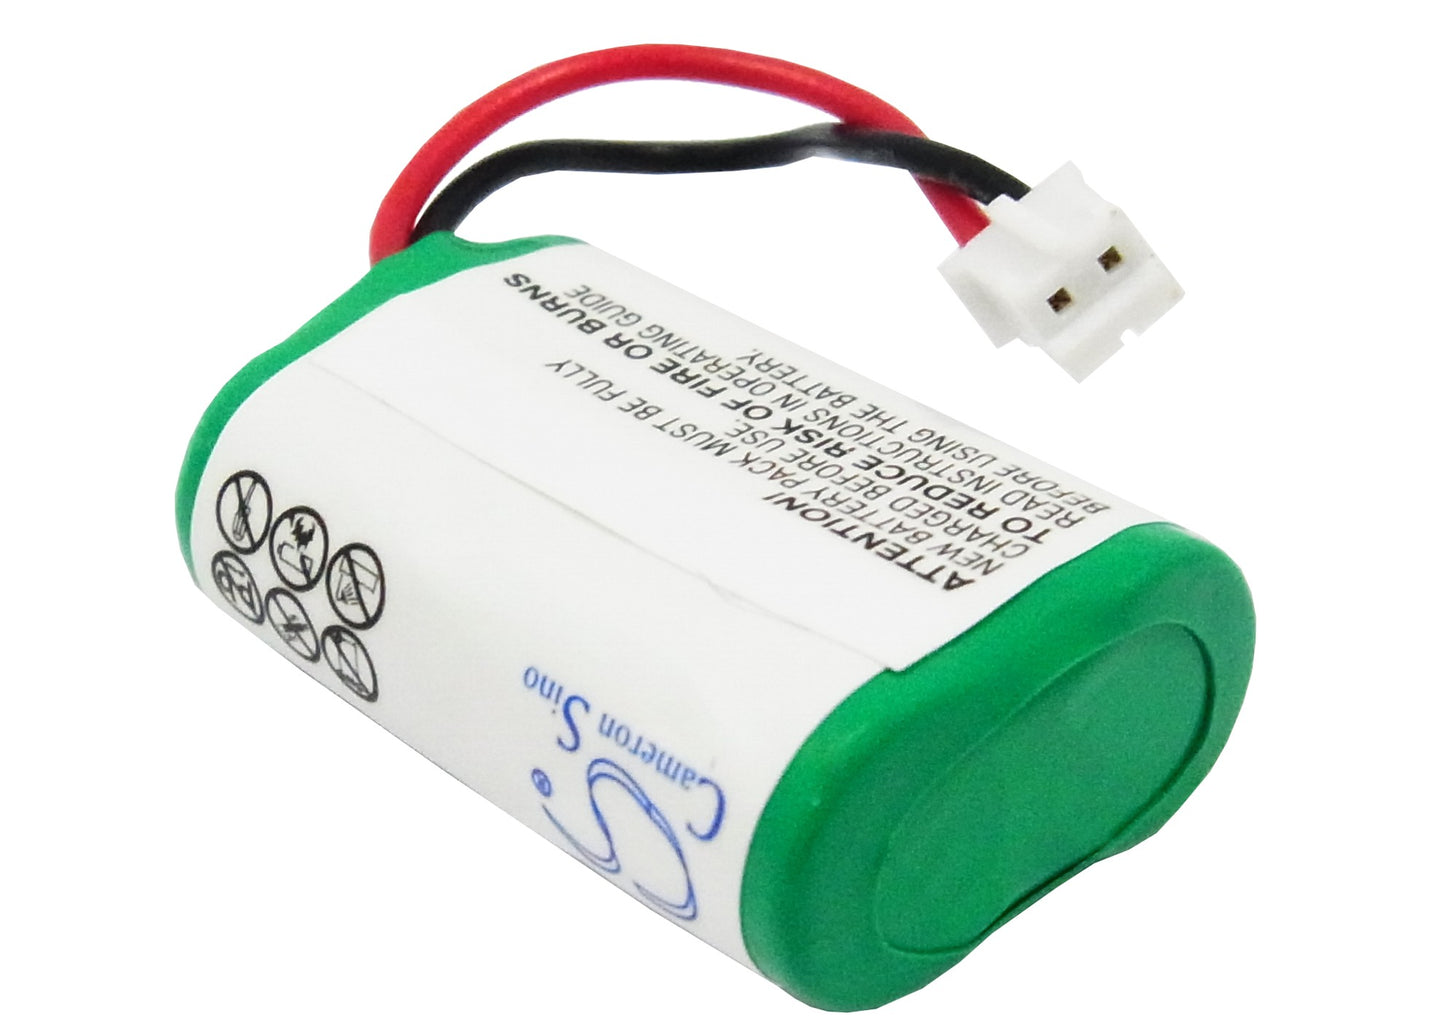 Replacement Battery For Sportdog Field Trainer SD-400 Reciever-SMAVtronics